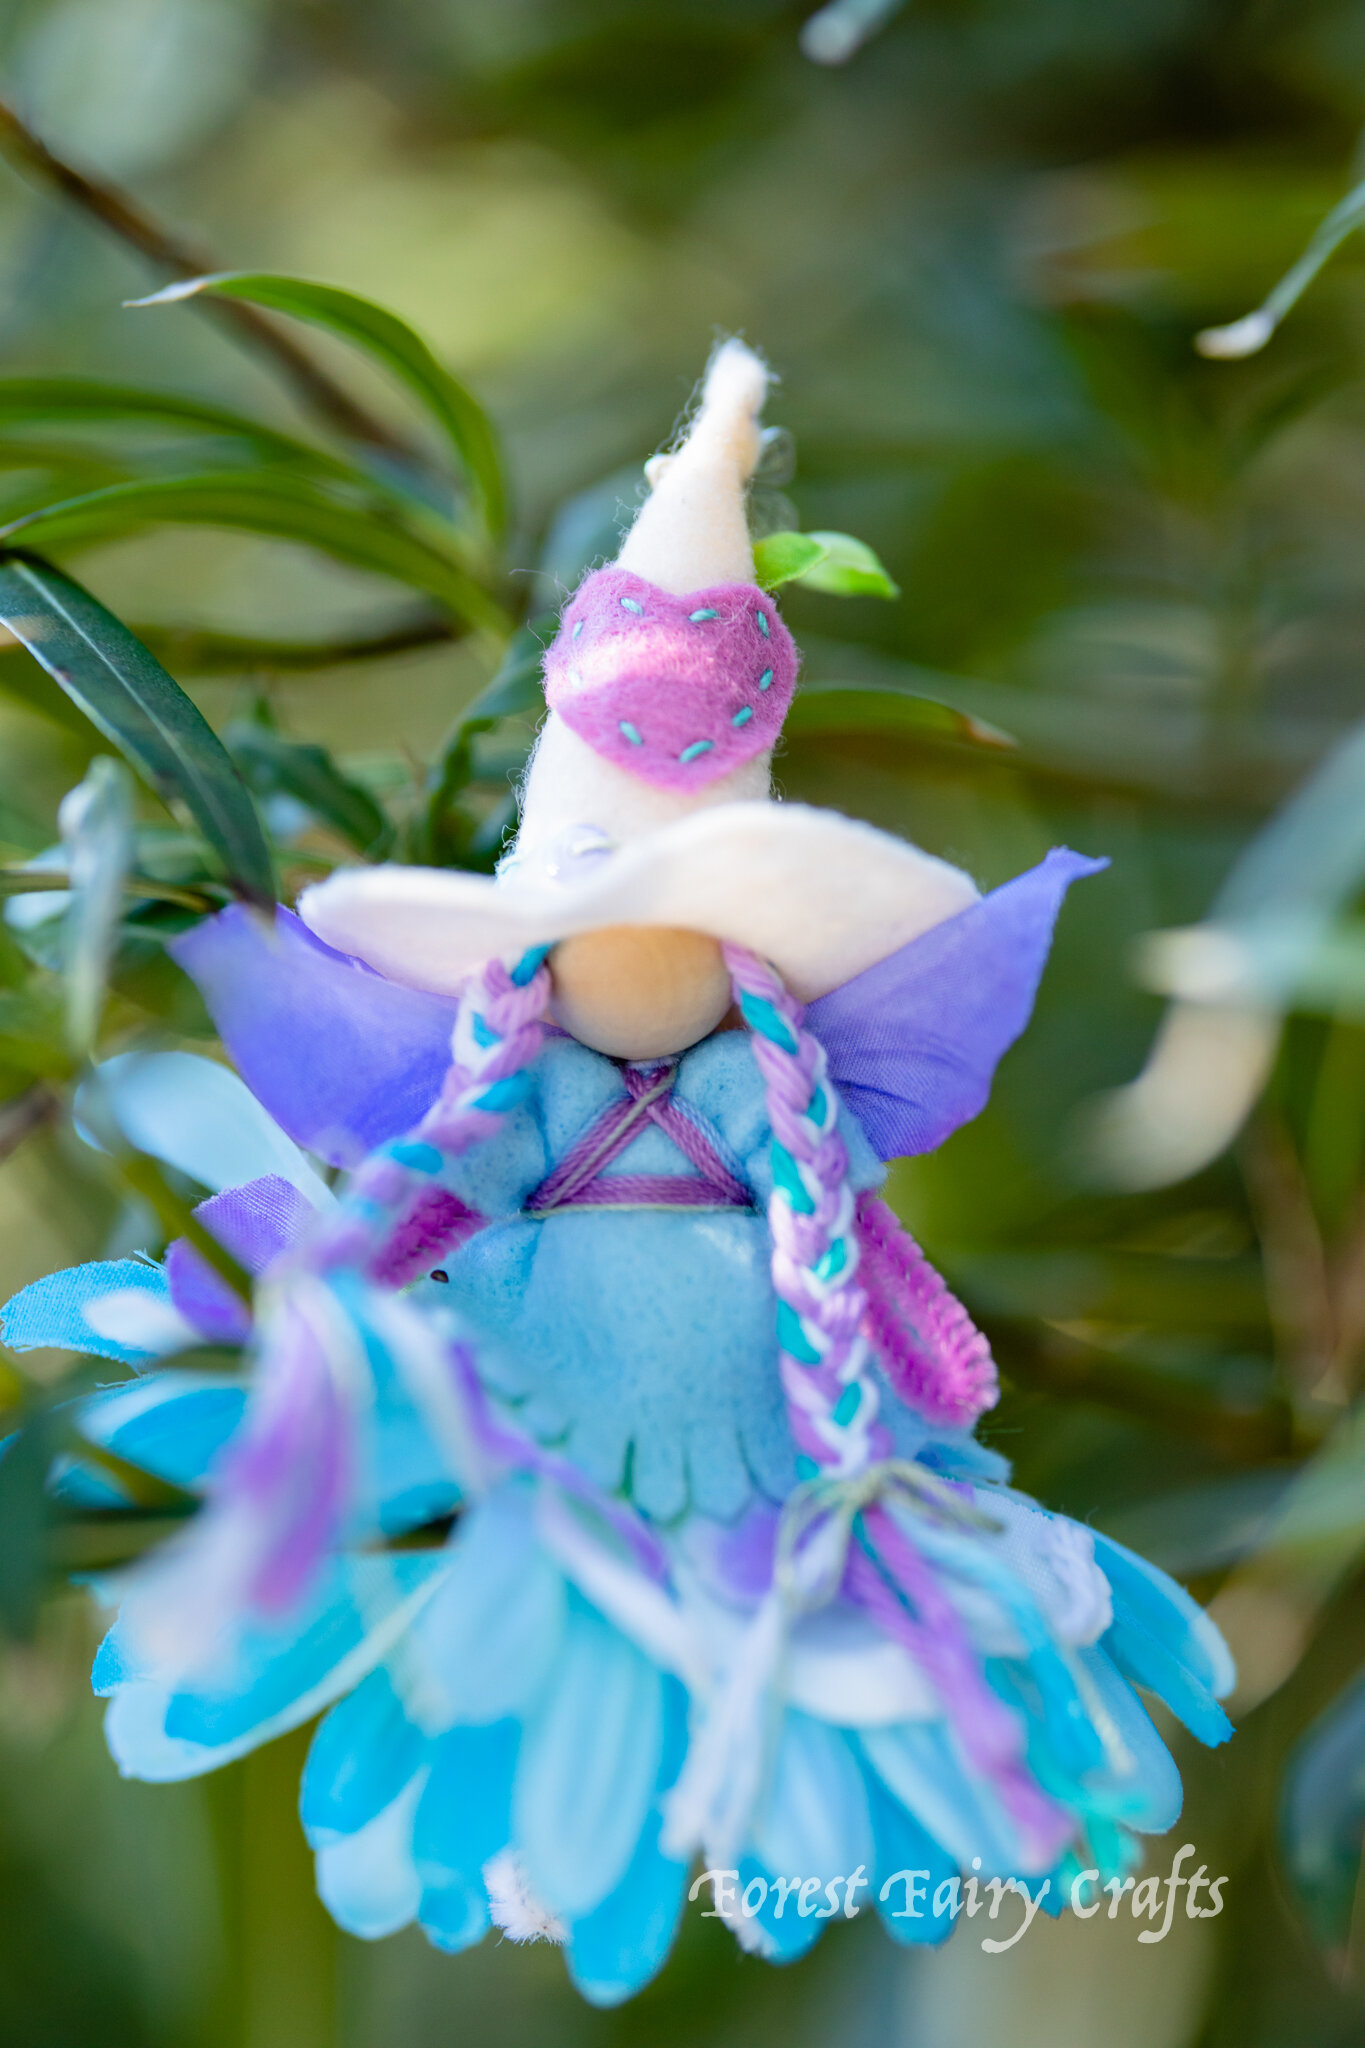 Fairy witch | Directions are in the Forest Fairy Crafts book by Lenka Vodicka-Paredes and Asia Currie | Bendy dolls for children | Waldorf and natural crafts teaching sewing and handwork